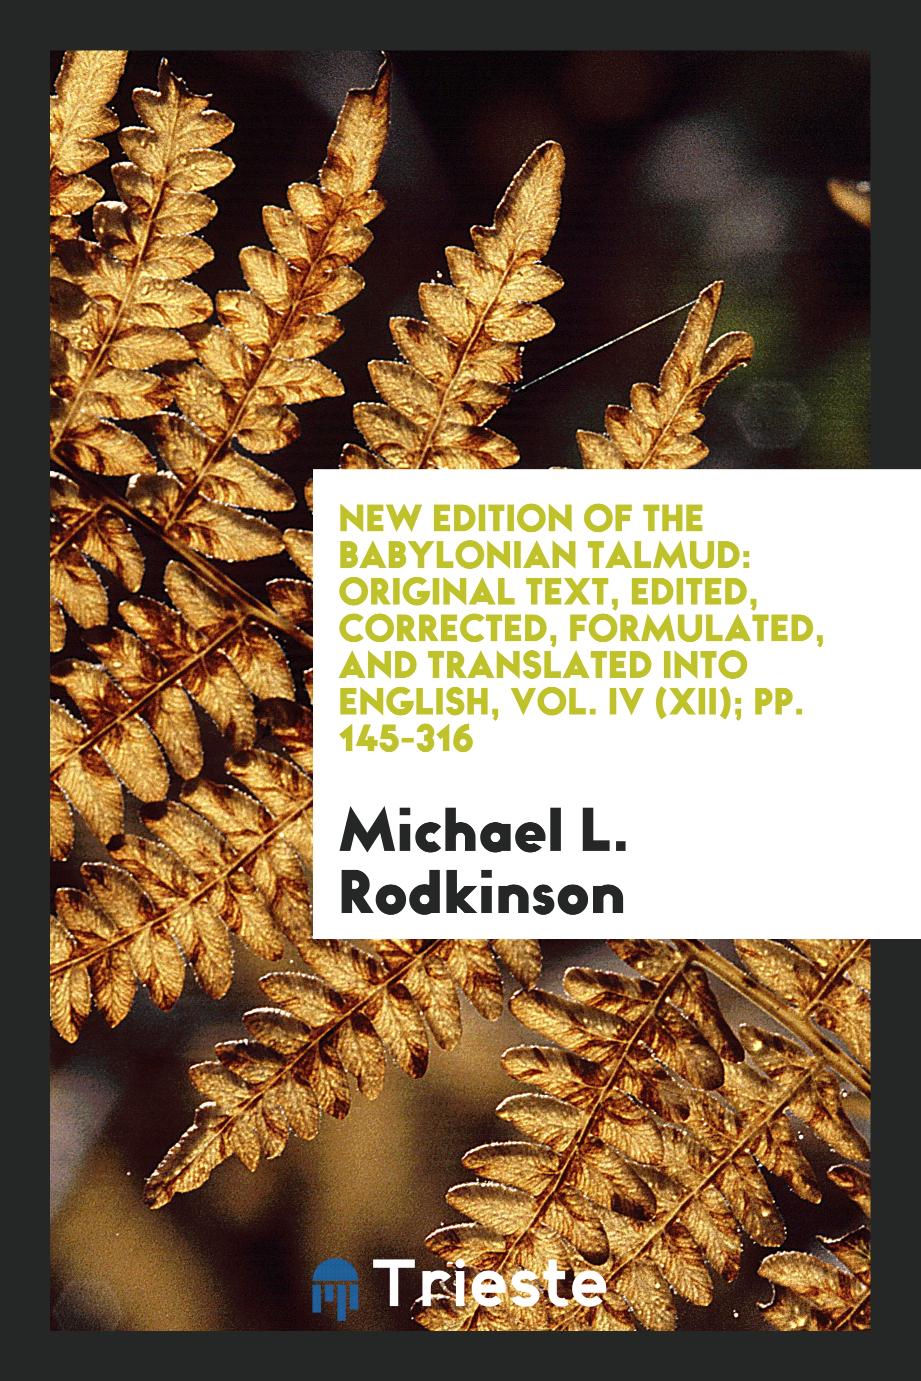 New Edition of the Babylonian Talmud: Original Text, Edited, Corrected, Formulated, and Translated into English, Vol. IV (XII); pp. 145-316